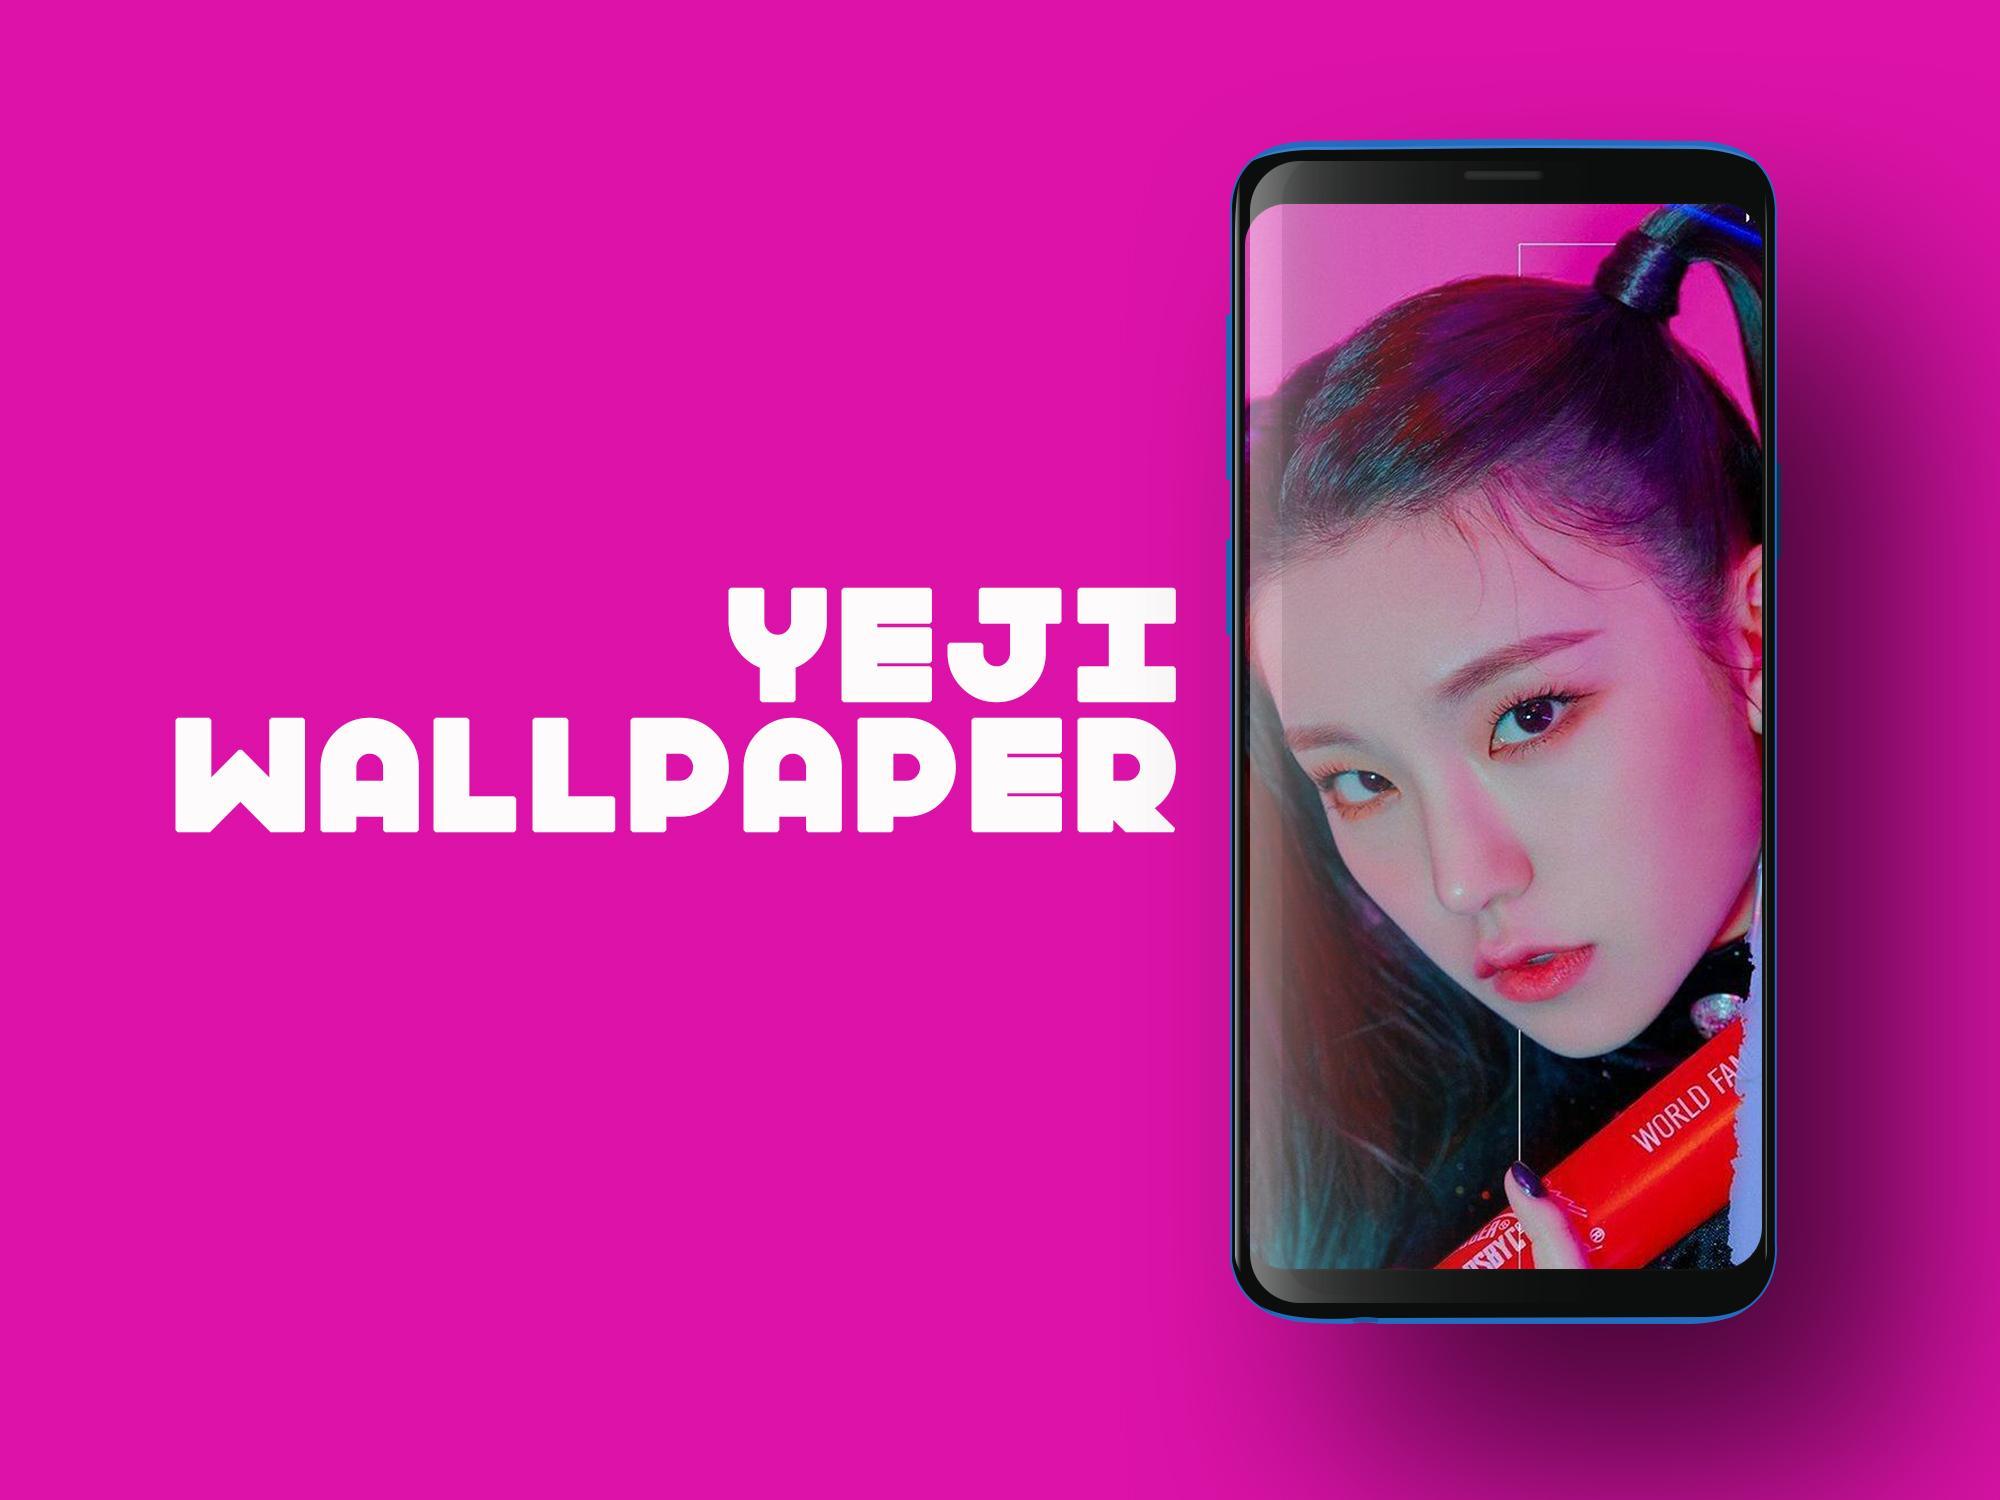 Itzy Yeji Wallpapers Kpop Fans Hd For Android Apk Download